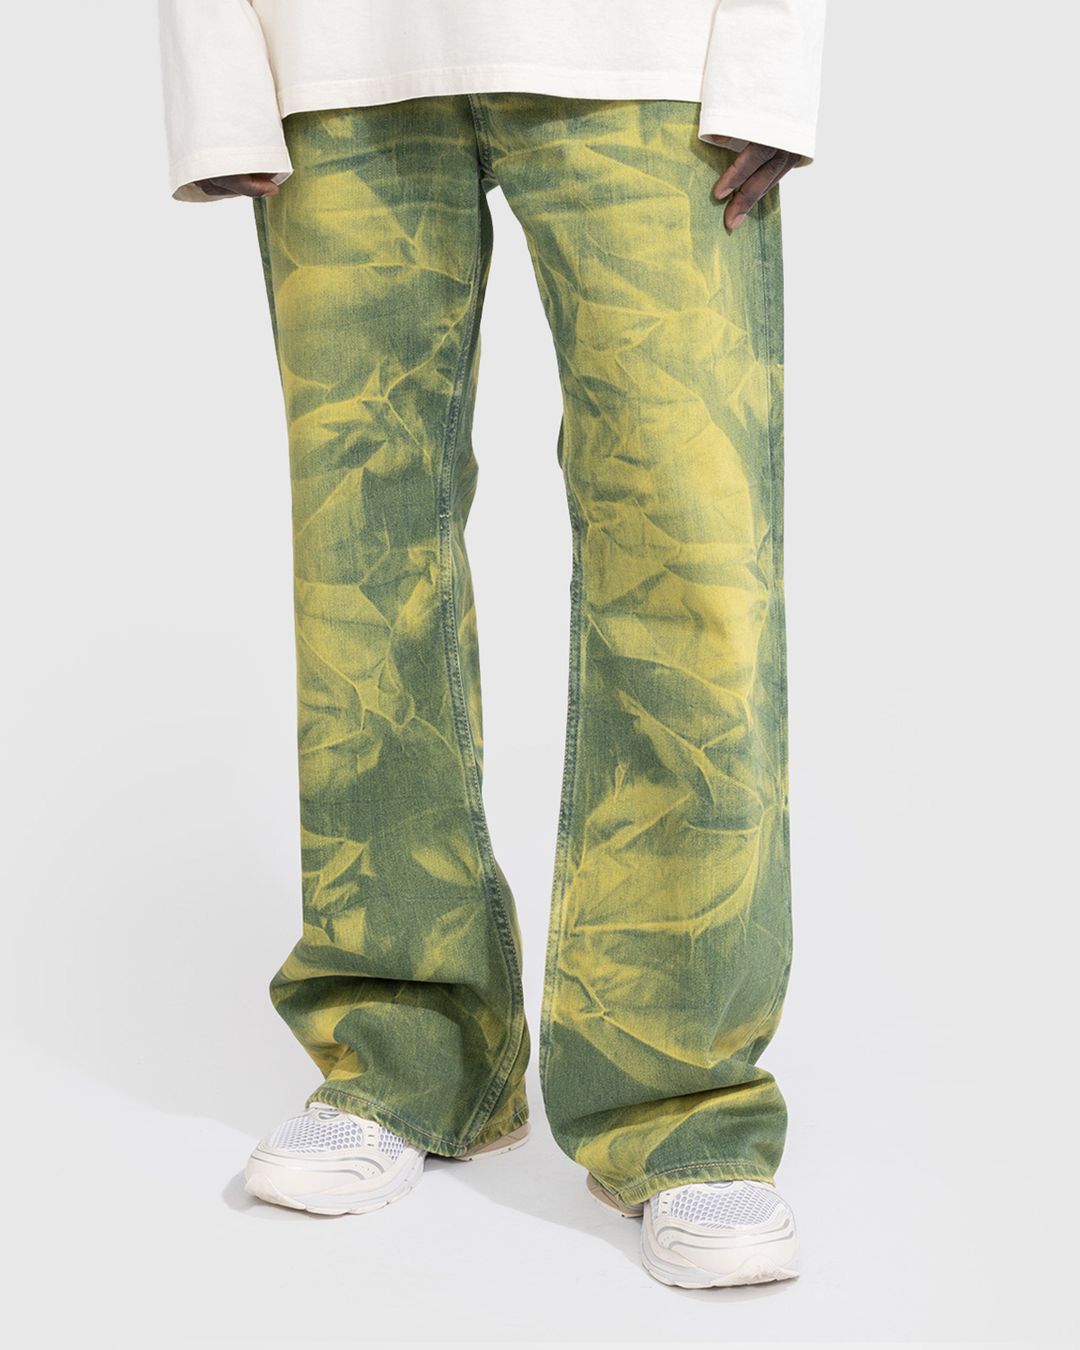 Acne Studios – Loose Fit Jeans 2021 Yellow/Blue | Highsnobiety Shop